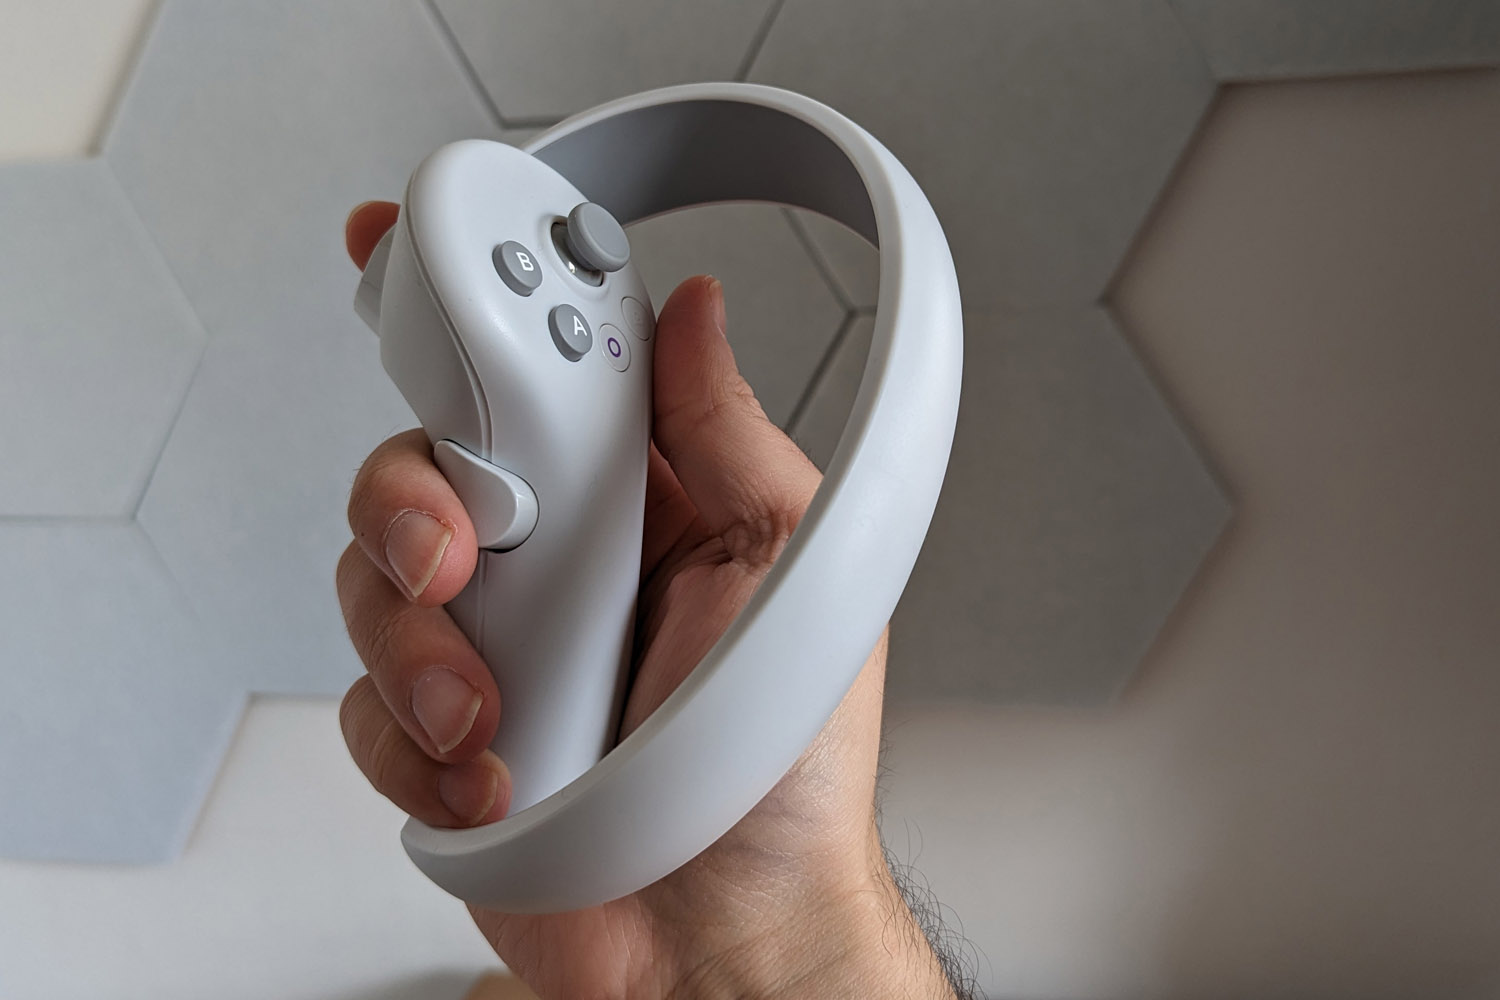 Pico 4 controller in hand